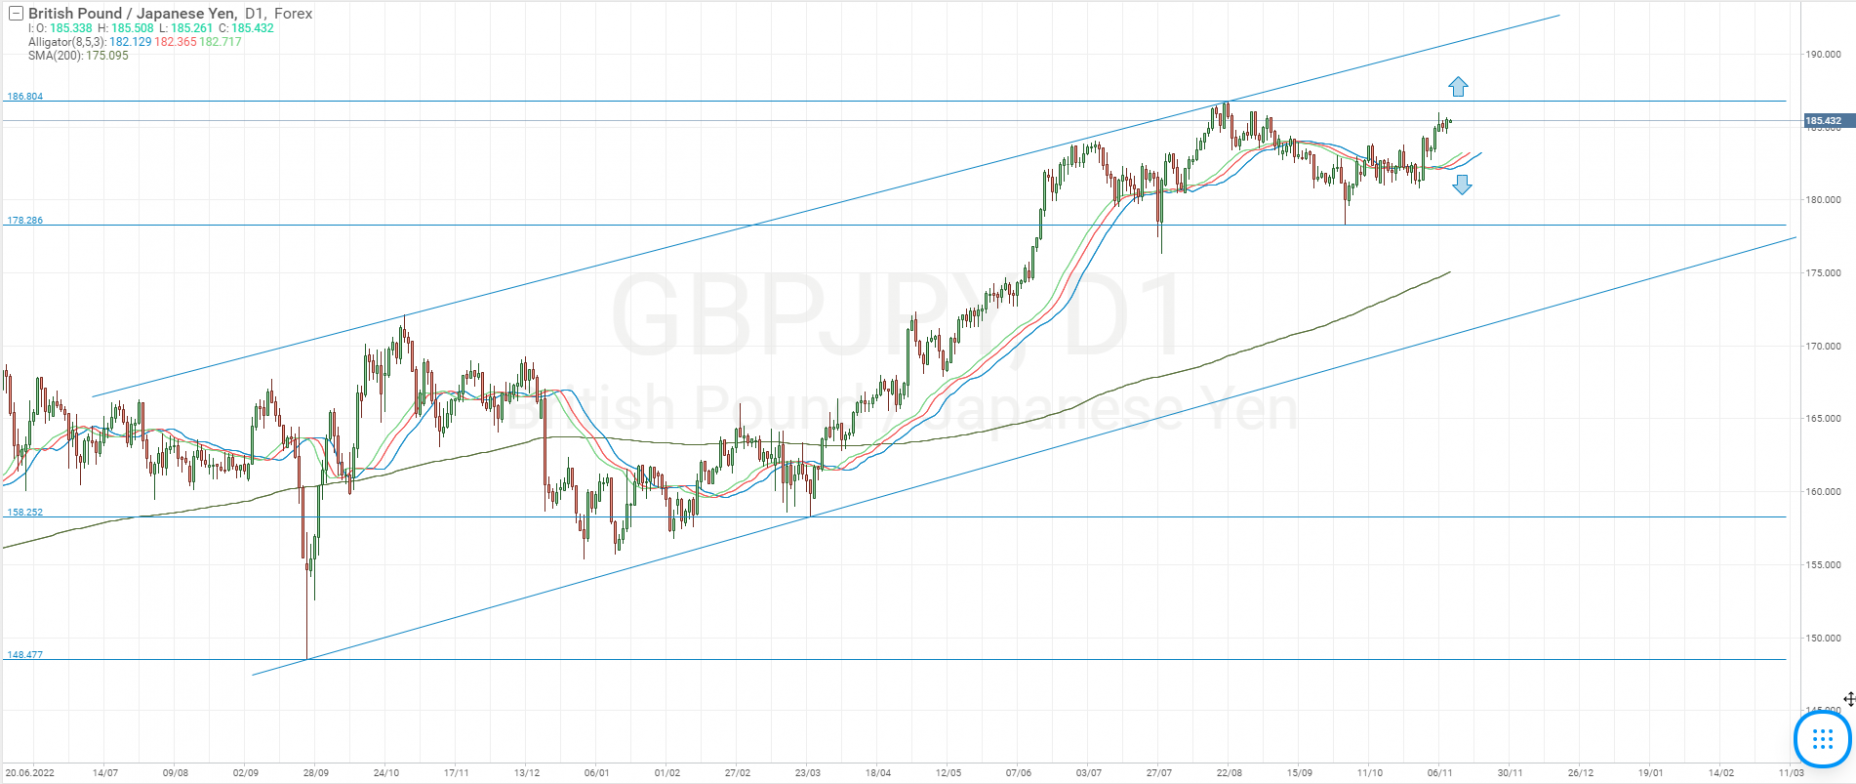 Technical analysis of the GBP/JPY currency pair